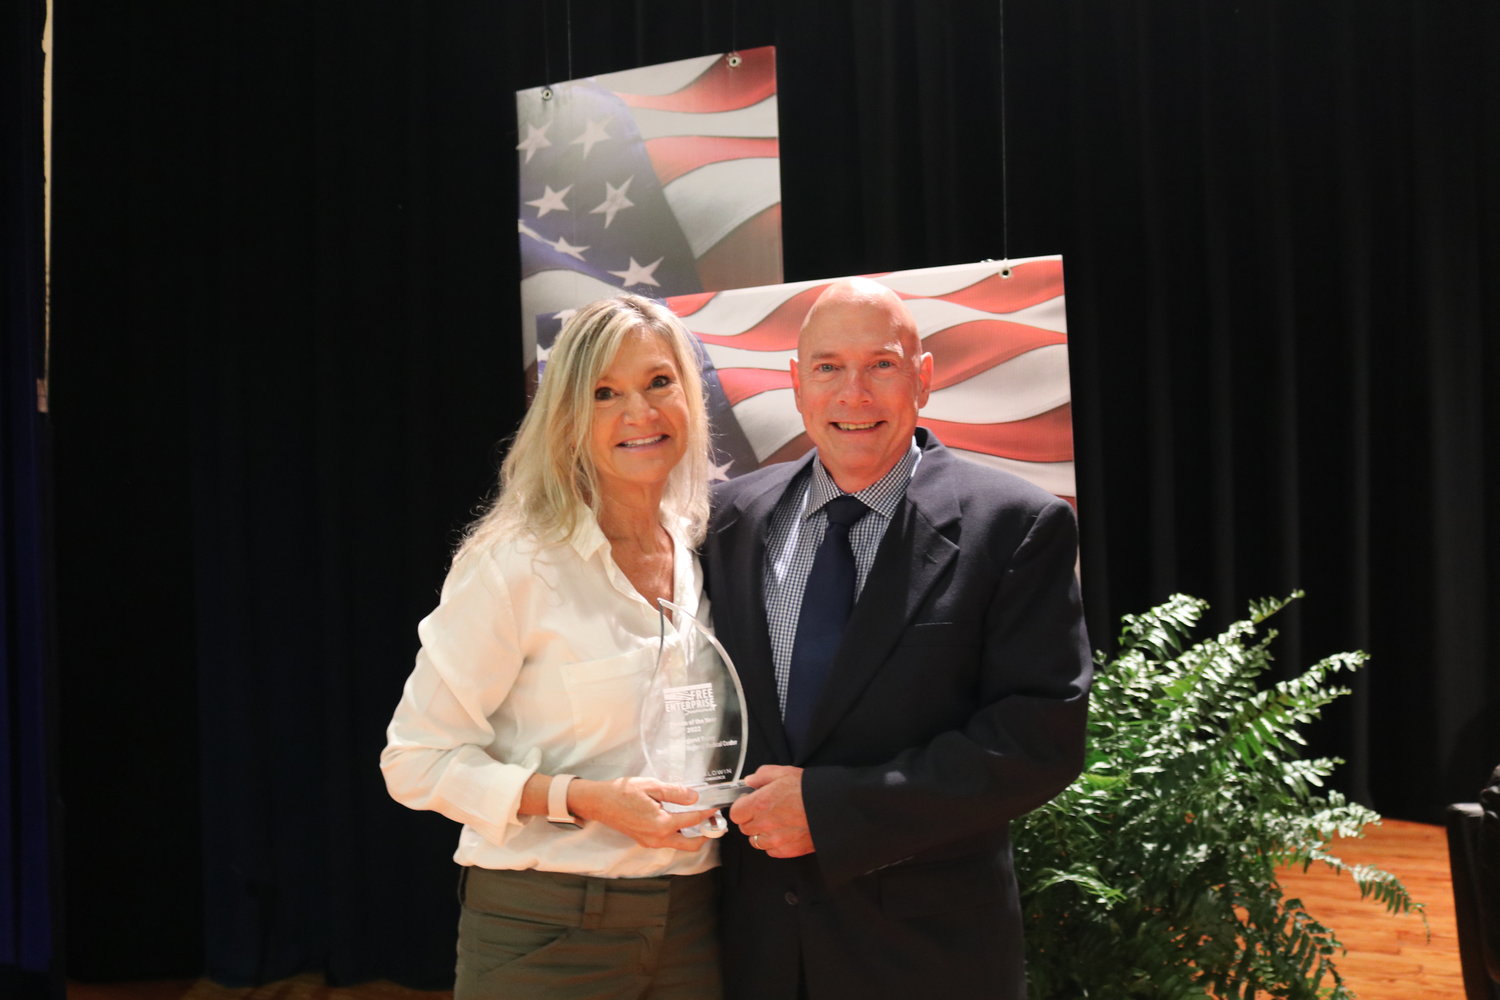 Margaret Roley, CEO of South Baldwin Regional Medical Center, receives the 2022 Walton M. Vines Free Enterprise Person of the Year award from last year’s recipient David Worthington, owner of Magnolia Springs Bed and Breakfast.